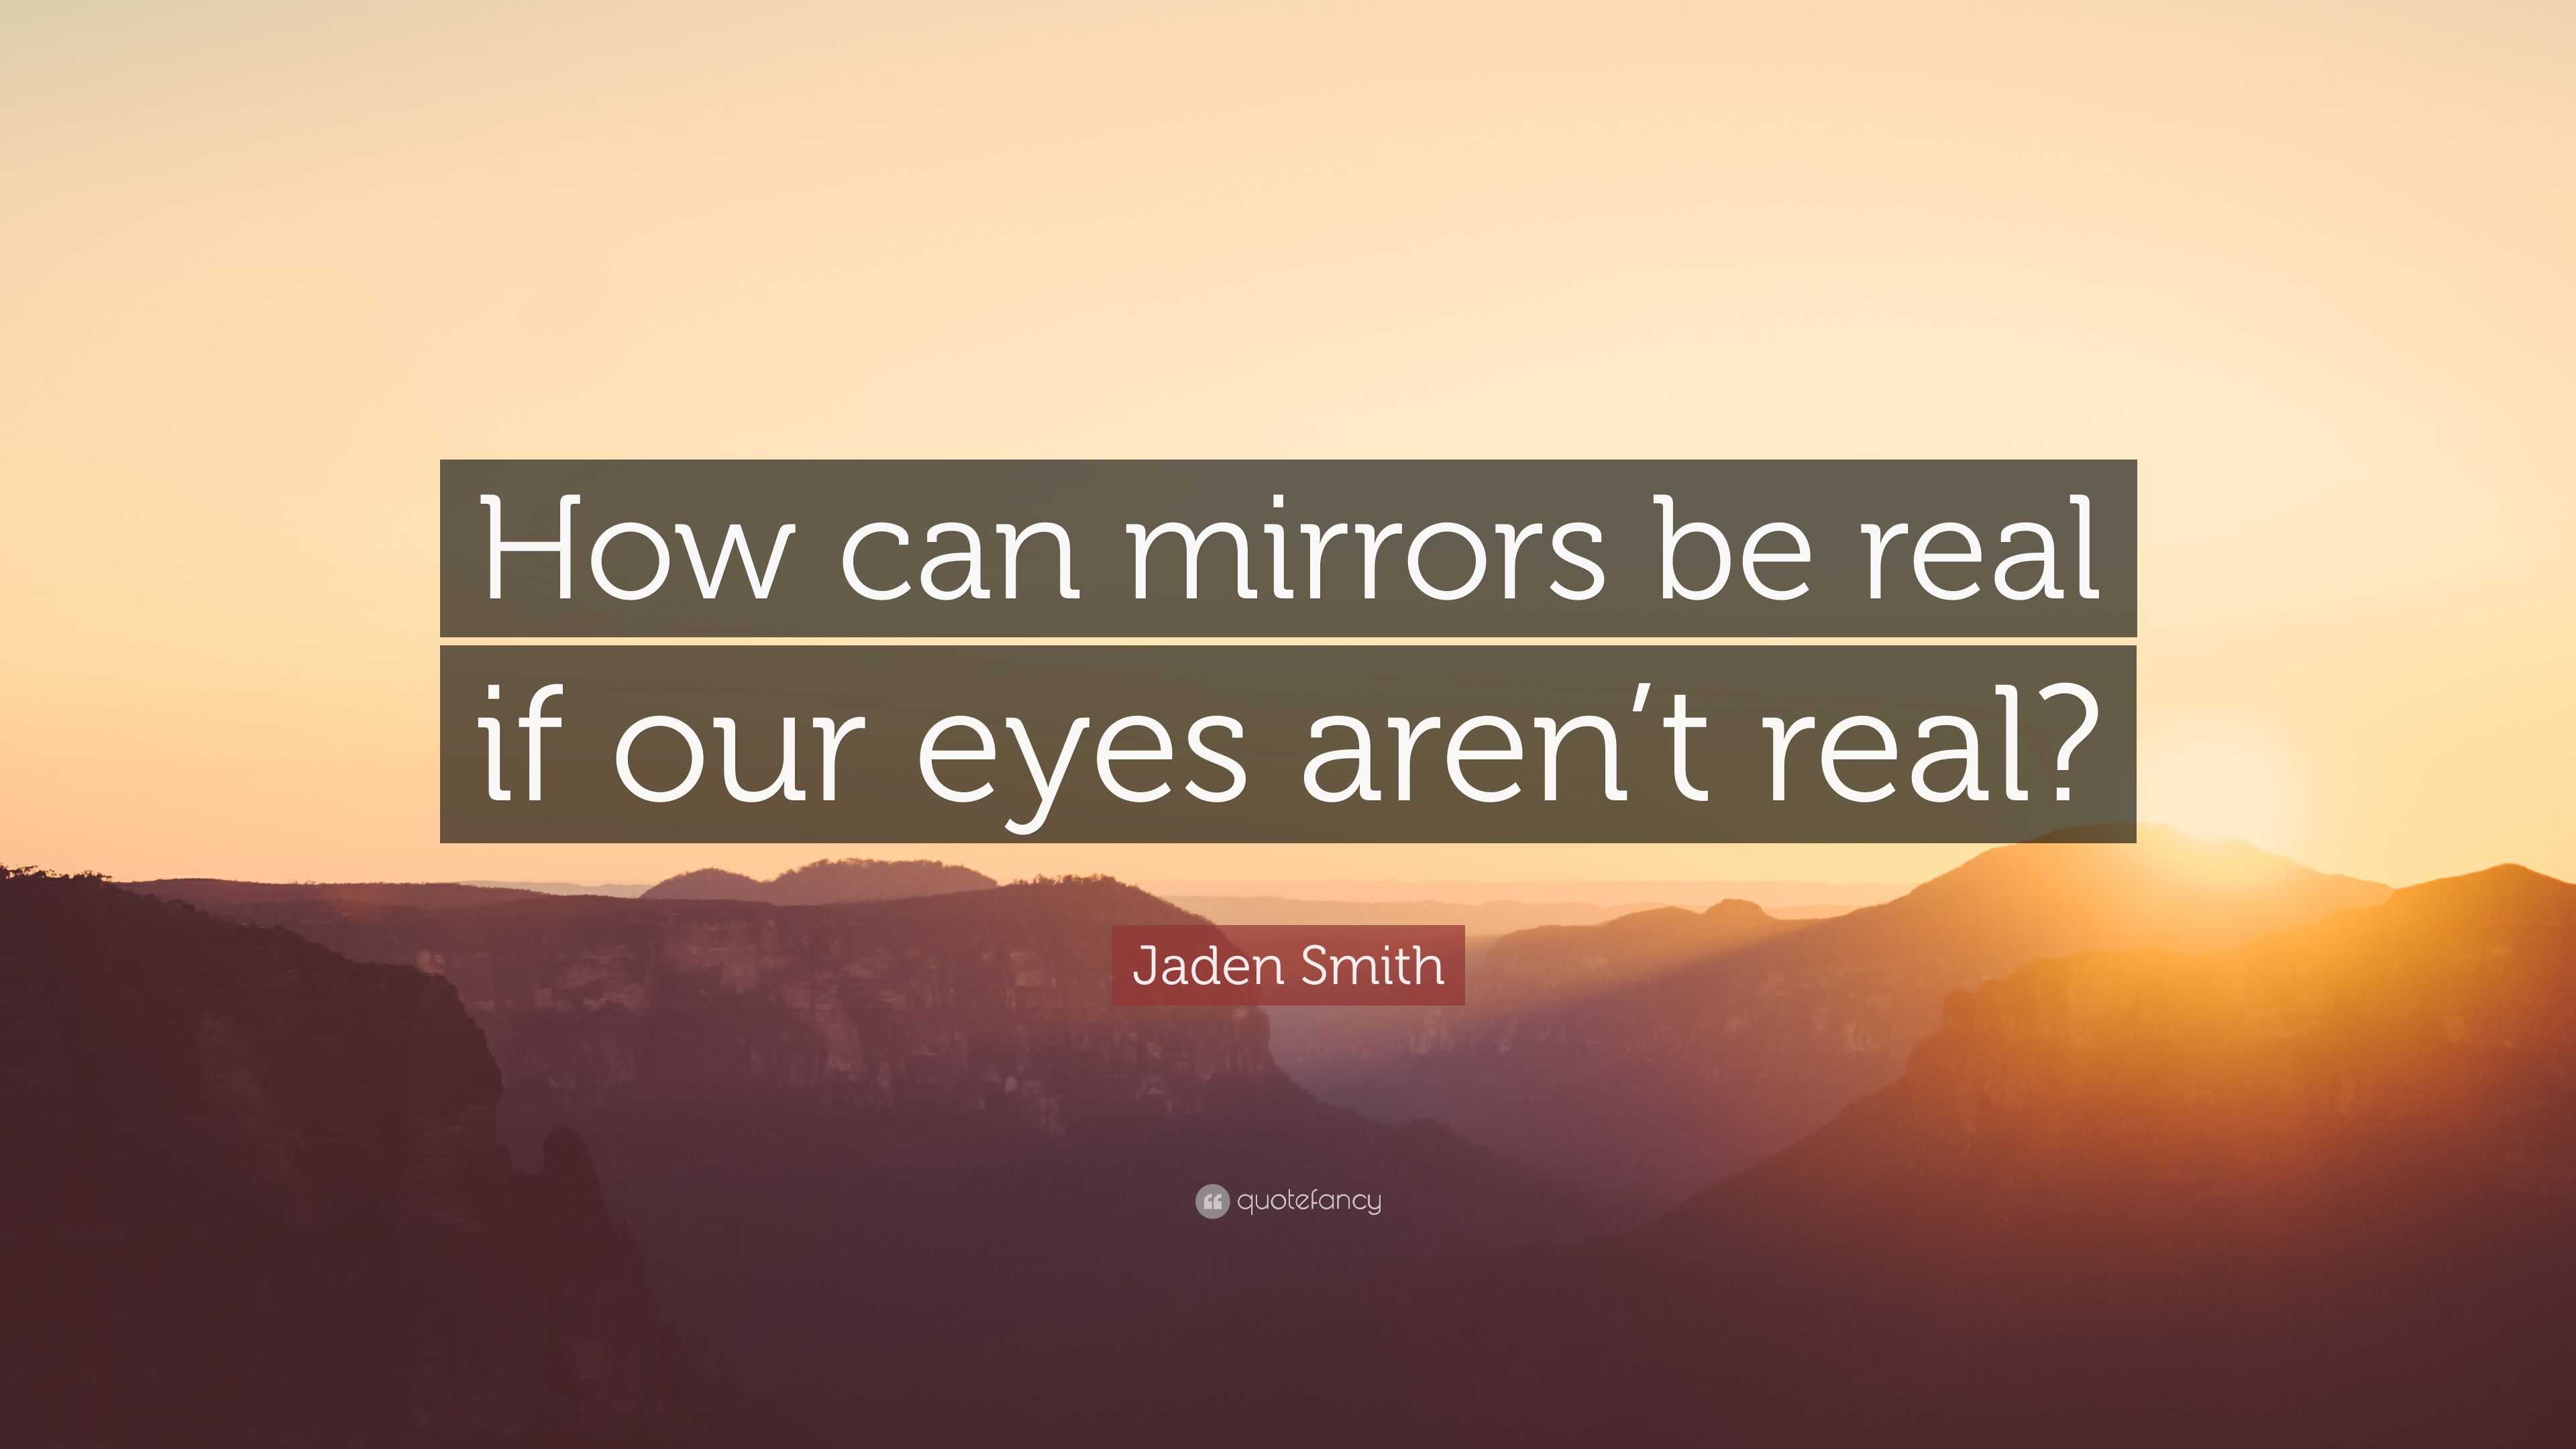 Jaden Smith Quote: "How can mirrors be real if our eyes aren't real?" (12 wallpapers) - Quotefancy